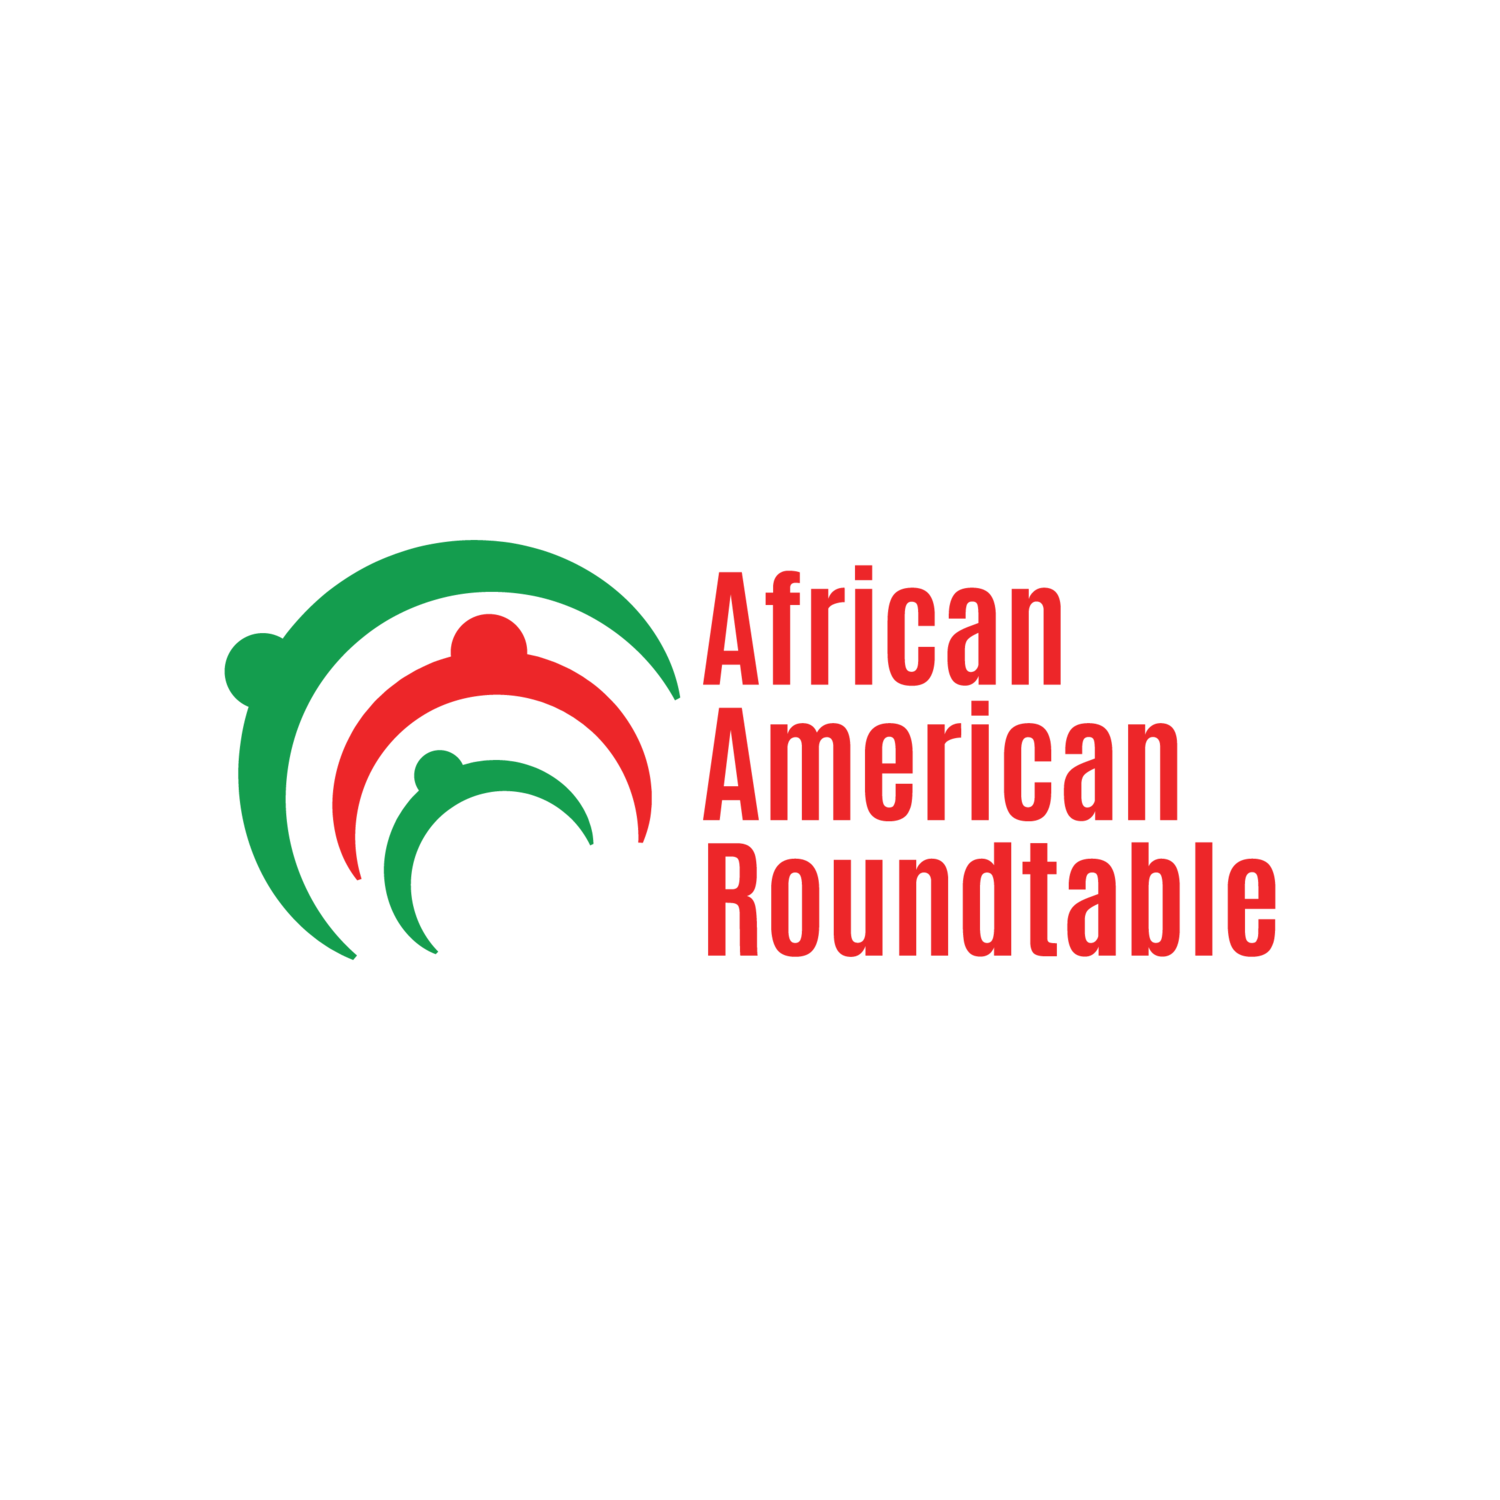 African American Roundtable